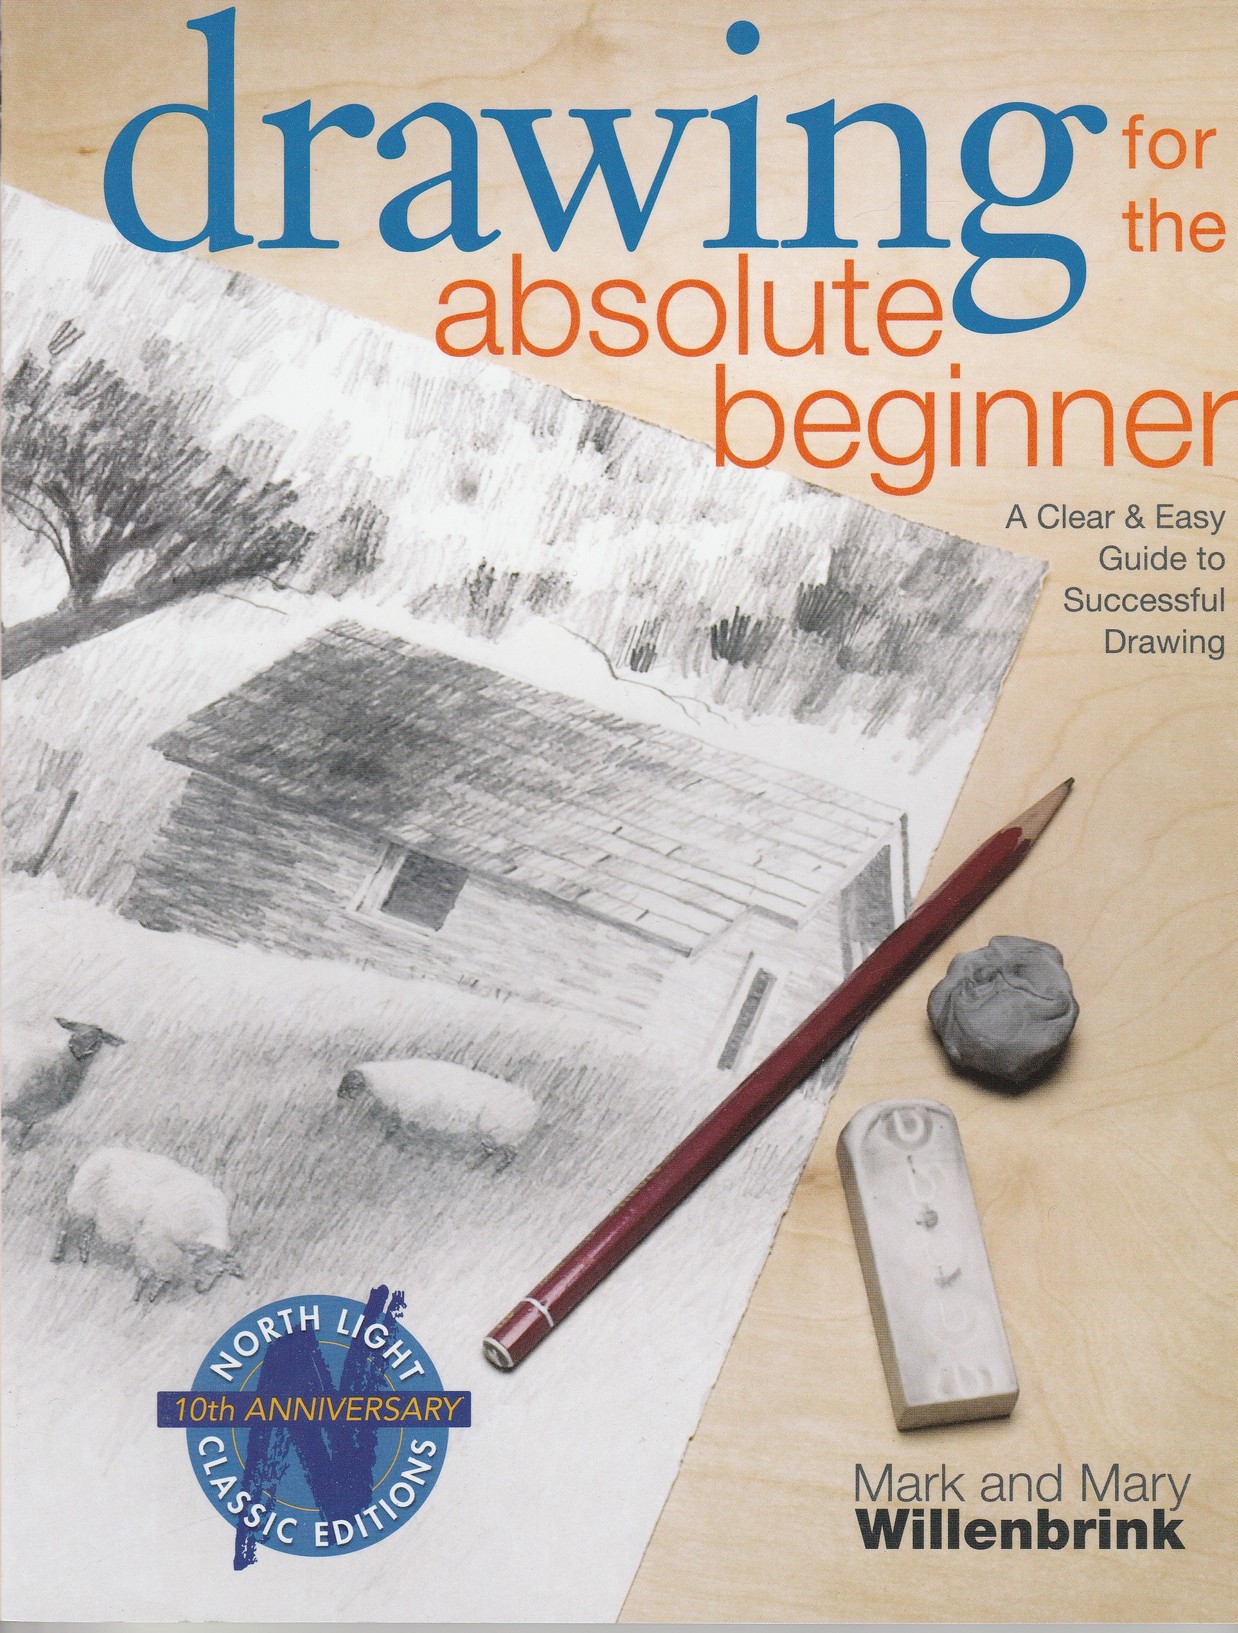 Drawing for the Absolute Beginner